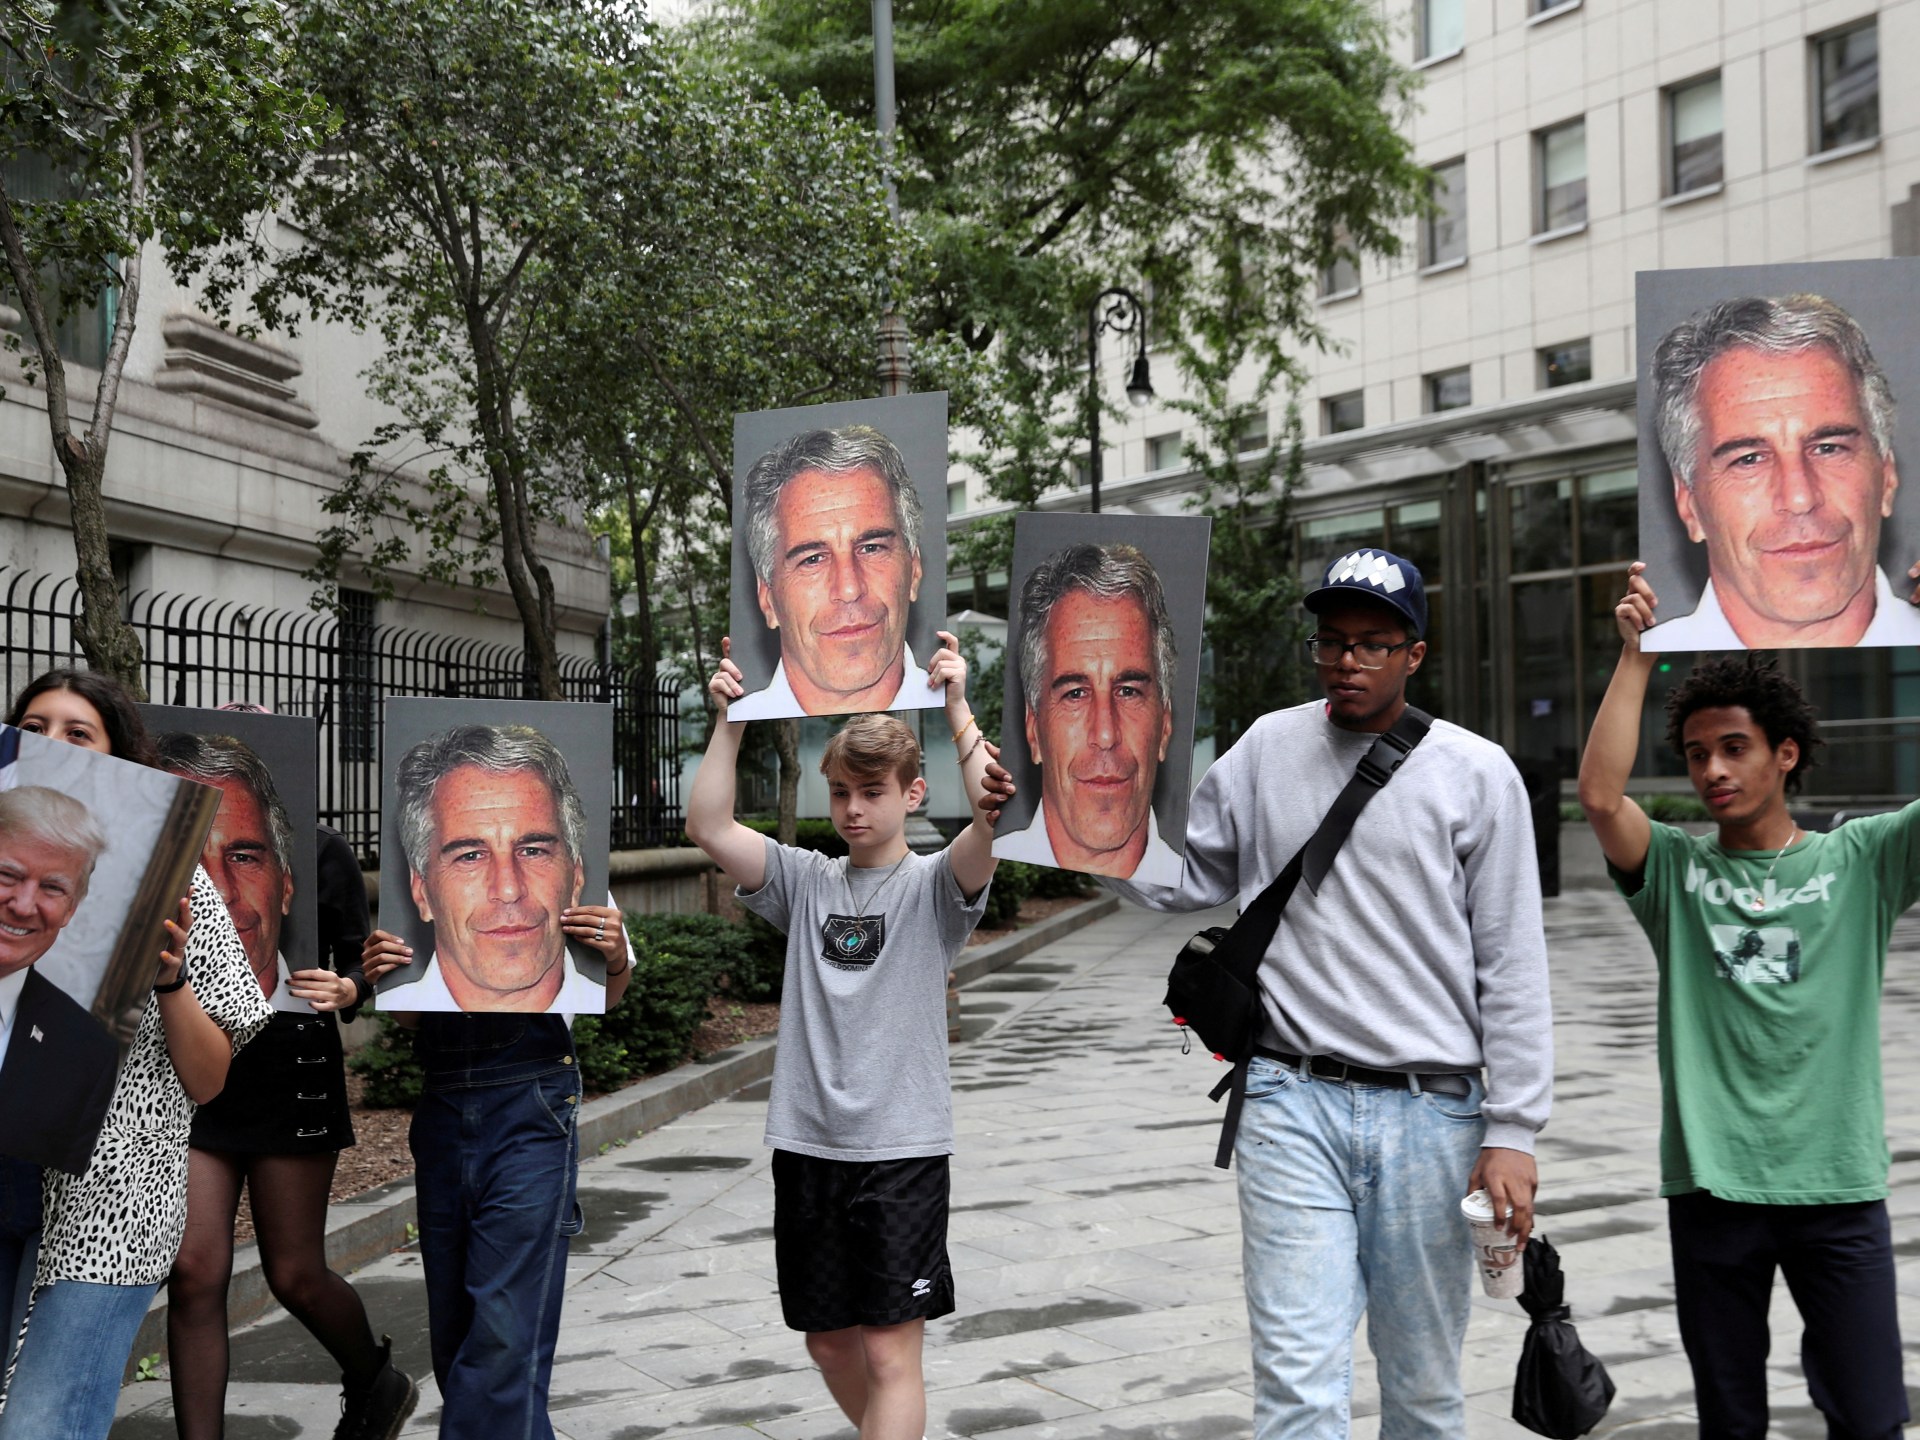 Initial tranche of nearly 950 Epstein court documents released | Crime News